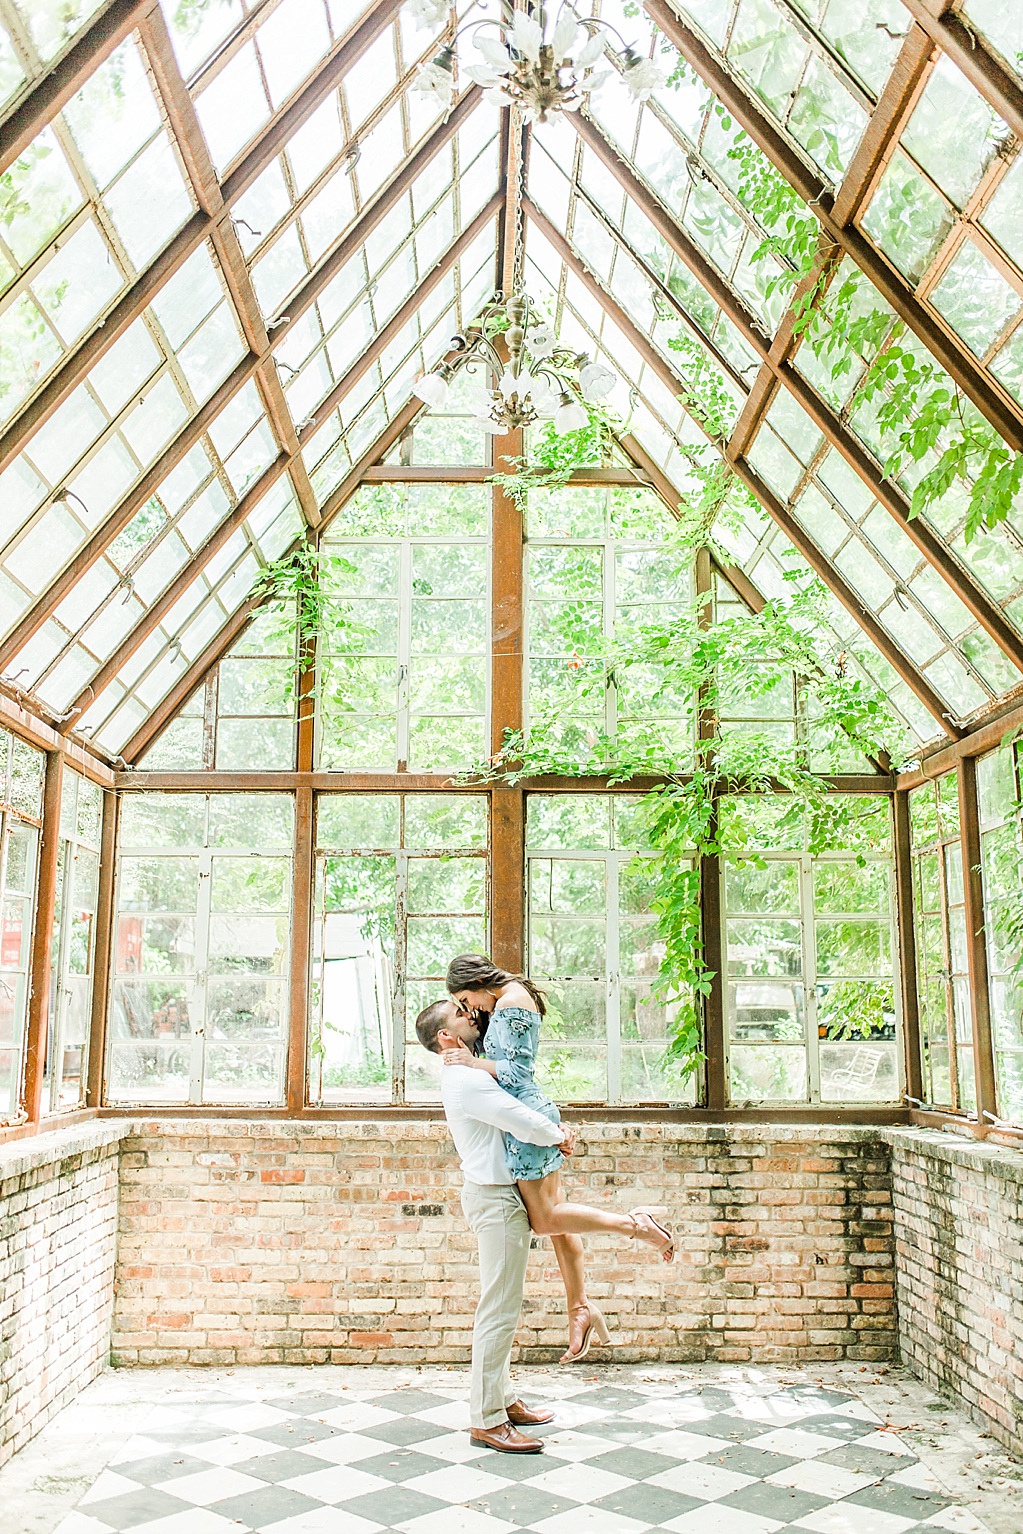 A Summer engagement Photo Session at Sekrit Theater in East Austin Texas By Allison Jeffers Wedding Photography 0029